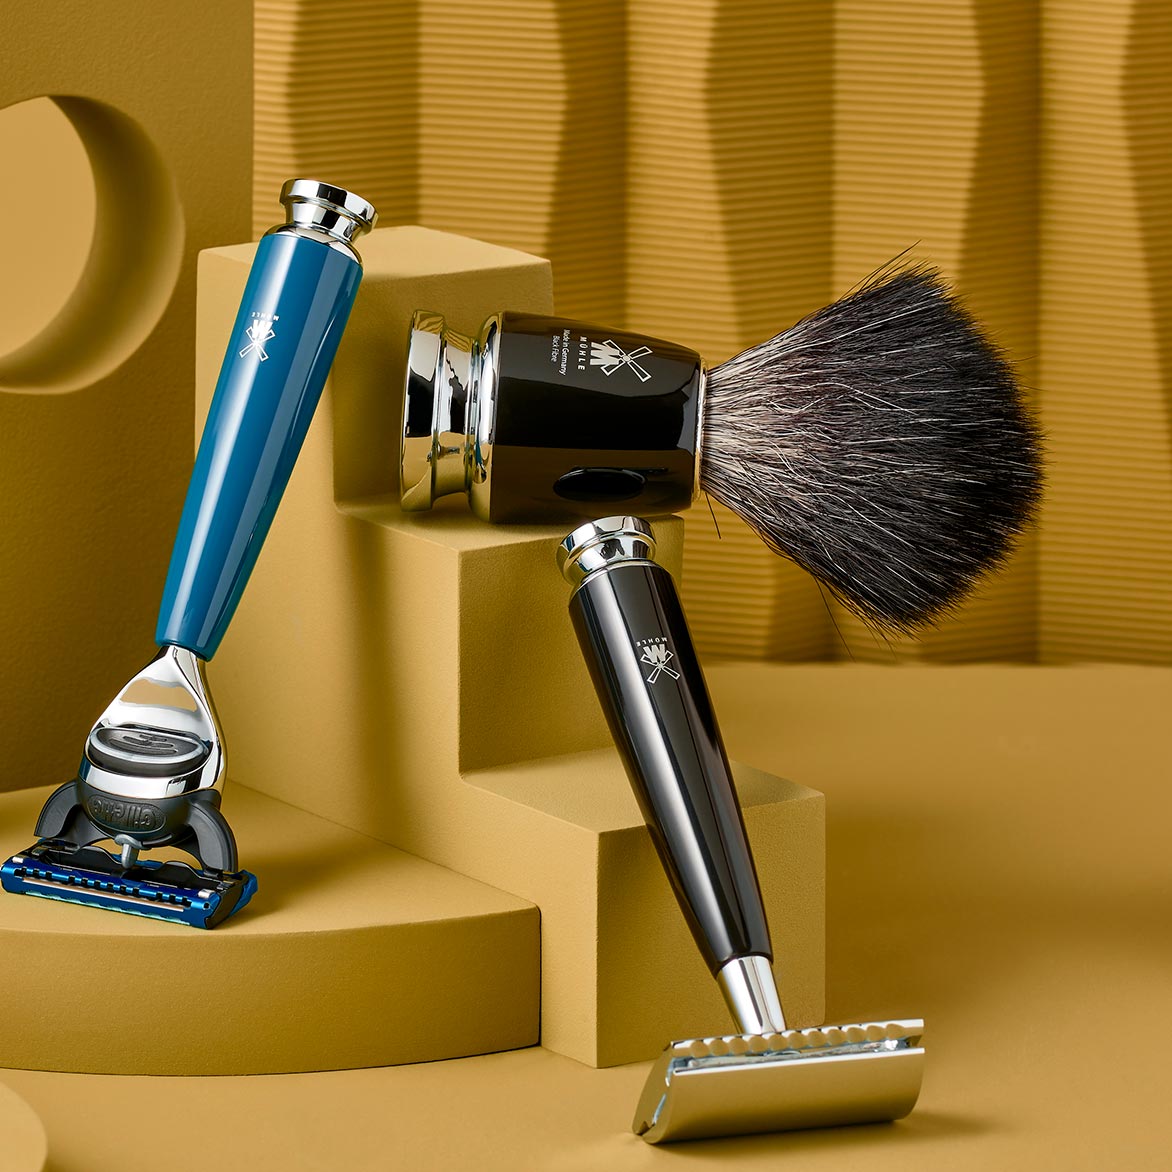 MUHLE razor collections